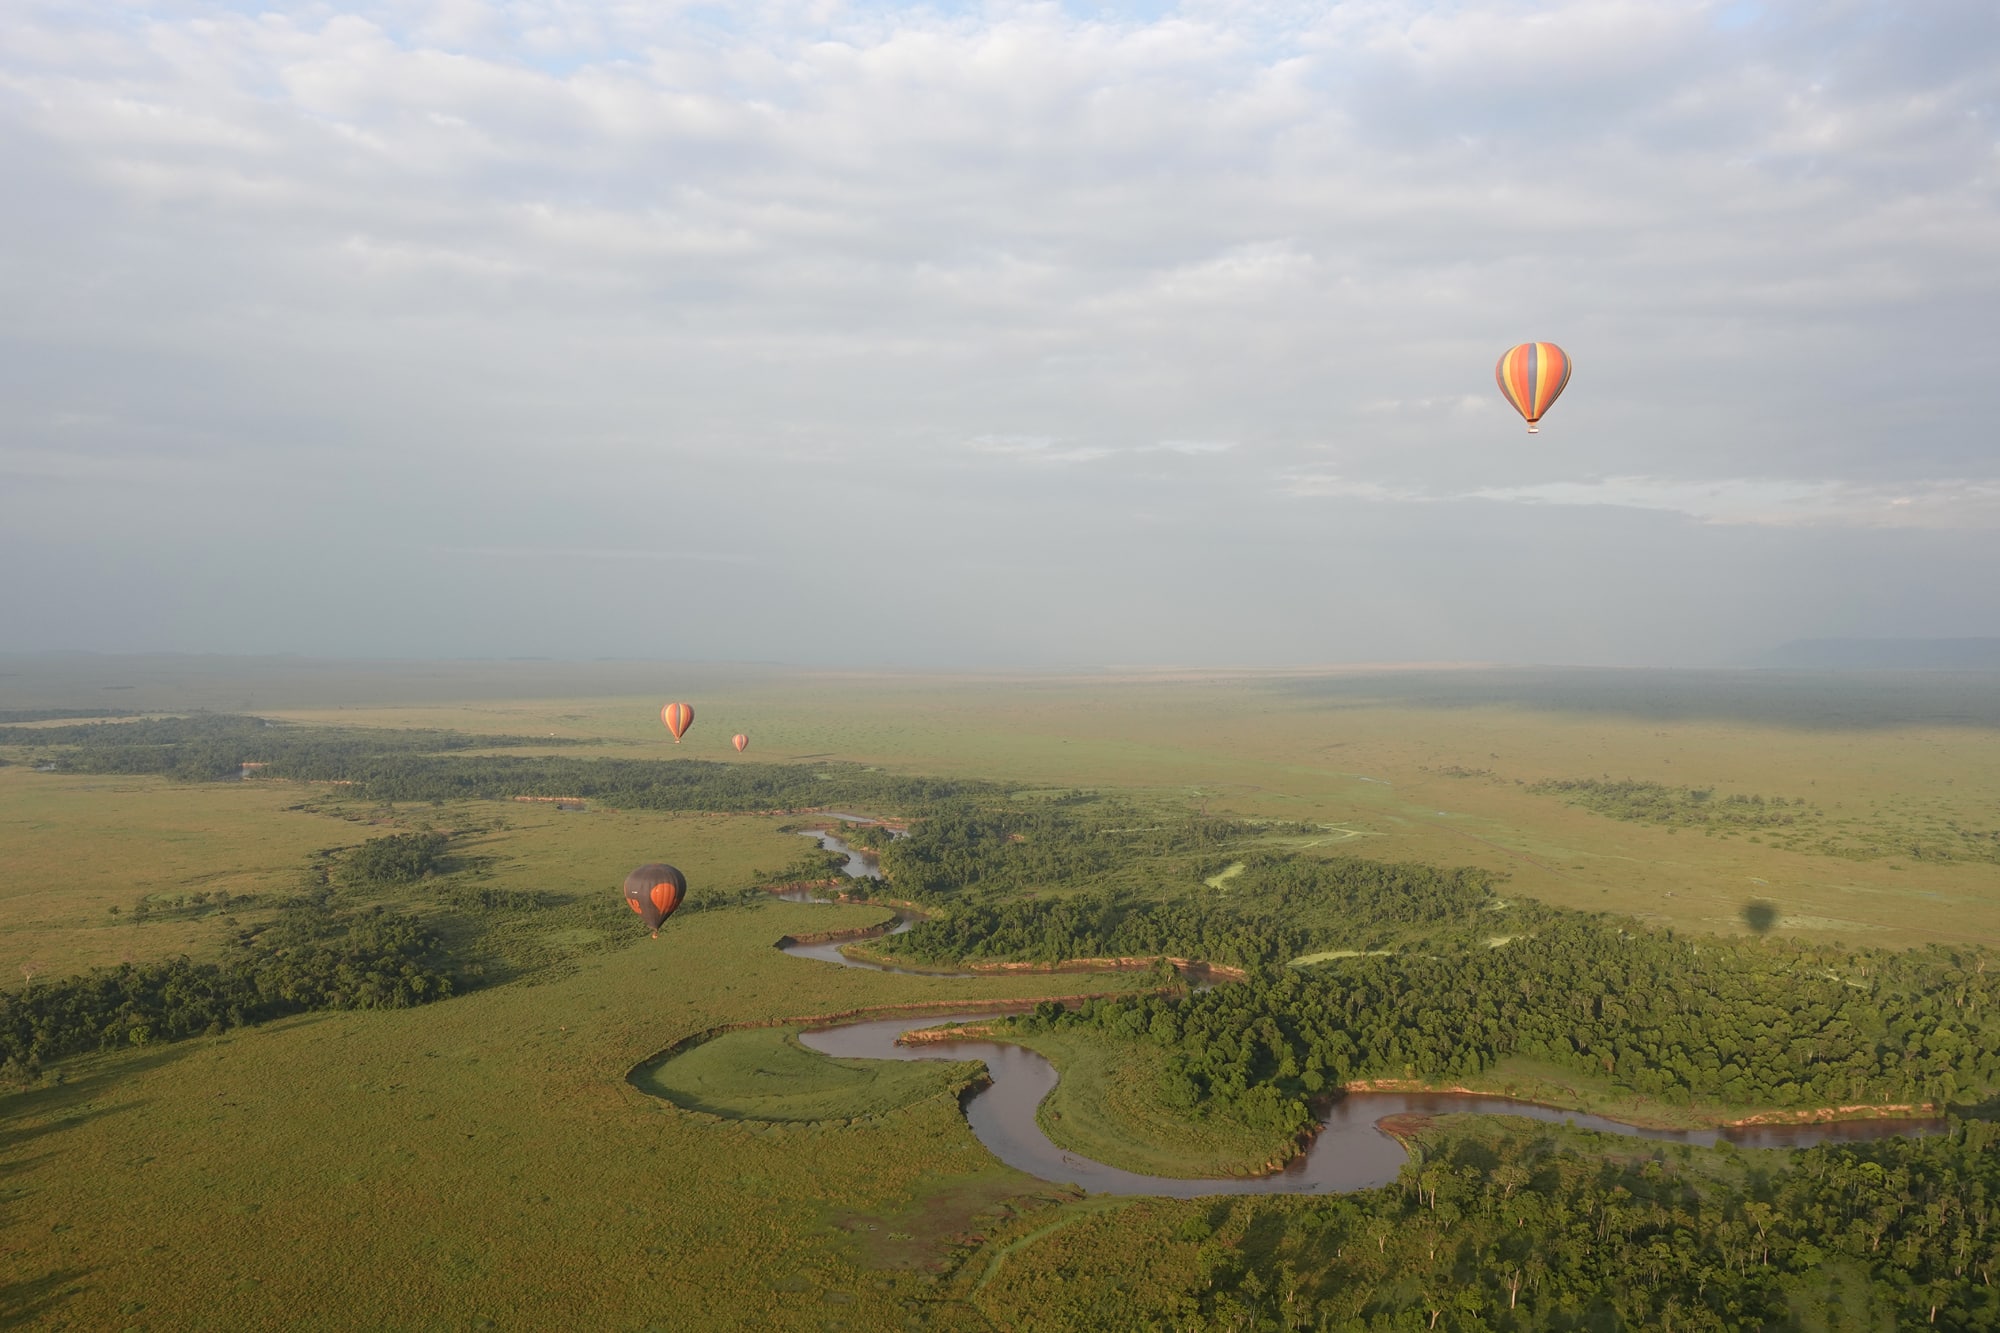 Four hot air balloons in the sky